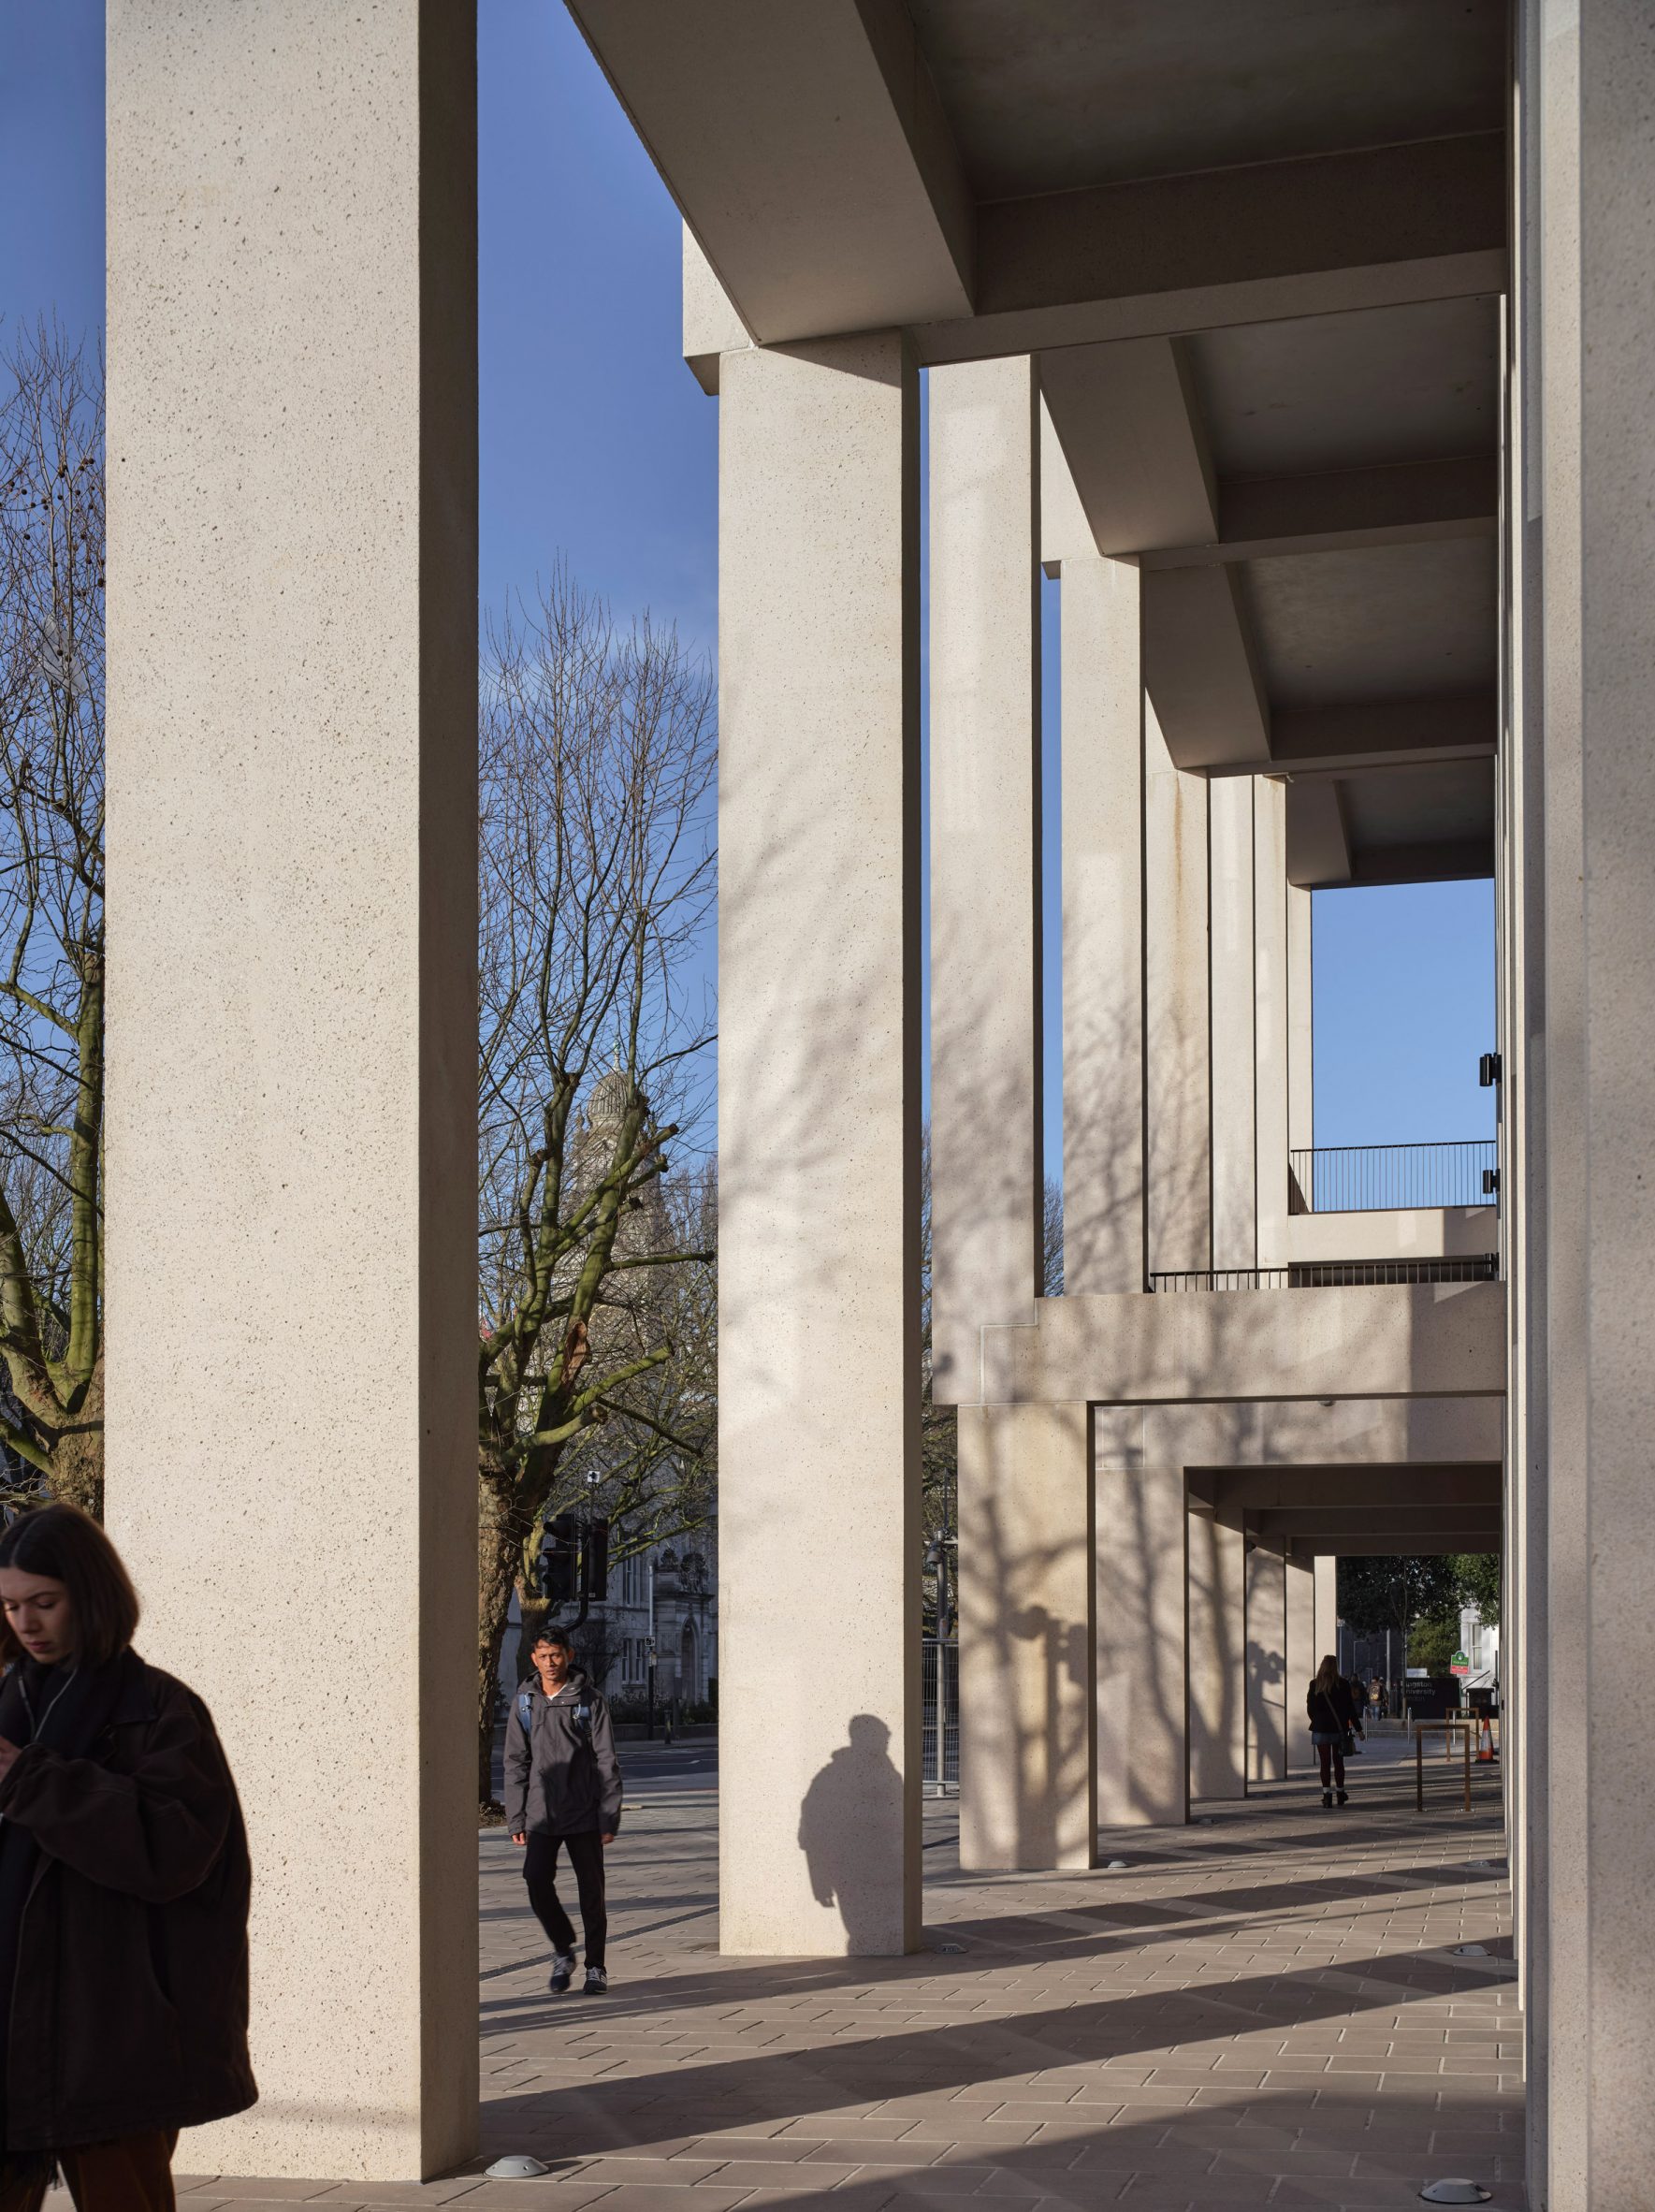 Kingston University London – Town House has won this year's Stirling Prize